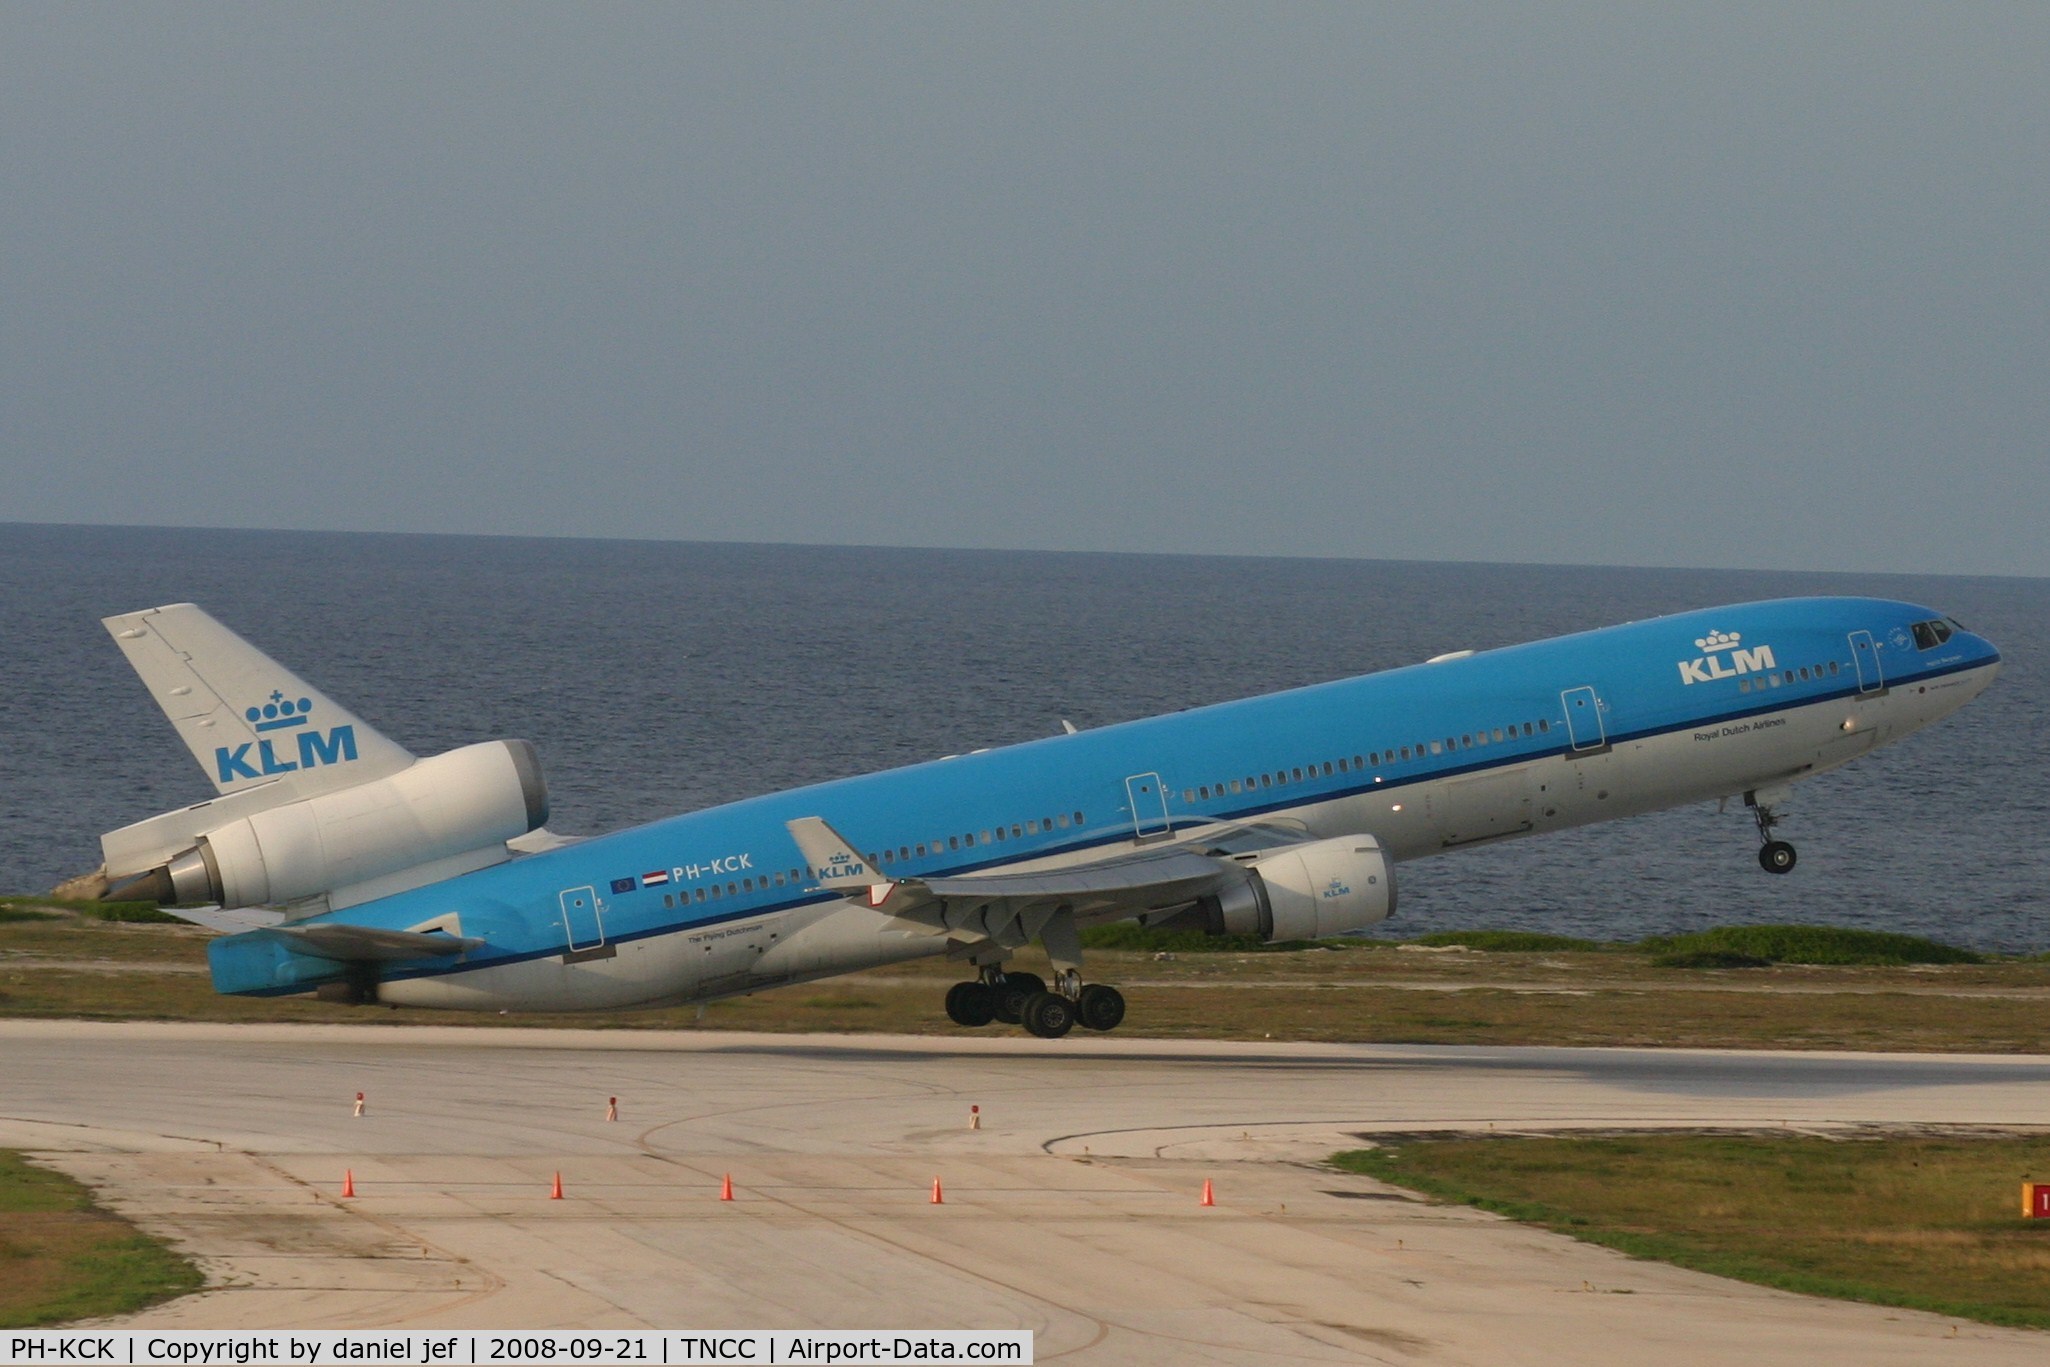 PH-KCK, 1997 McDonnell Douglas MD-11 C/N 48564, departing Curacao for europa